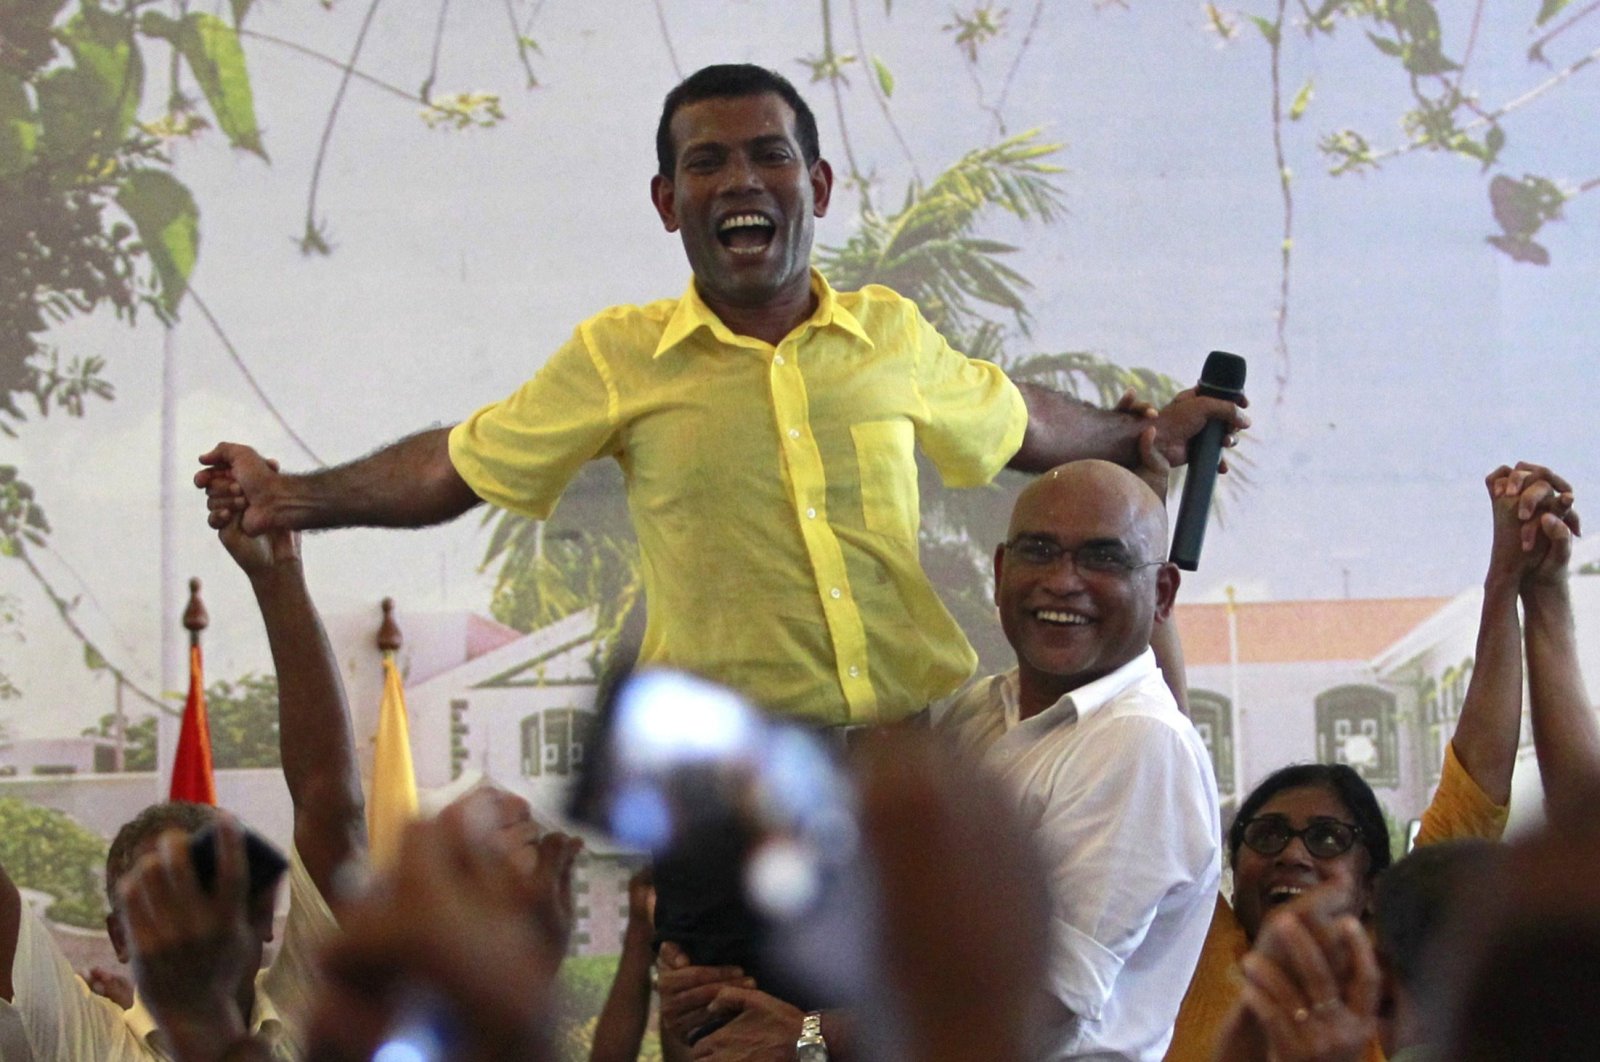 Ousted Maldivian President Mohamed Nasheed is carried by his supporters during the Maldivian Democratic Party's meeting in Male, Feb. 8, 2012.   (REUTERS)